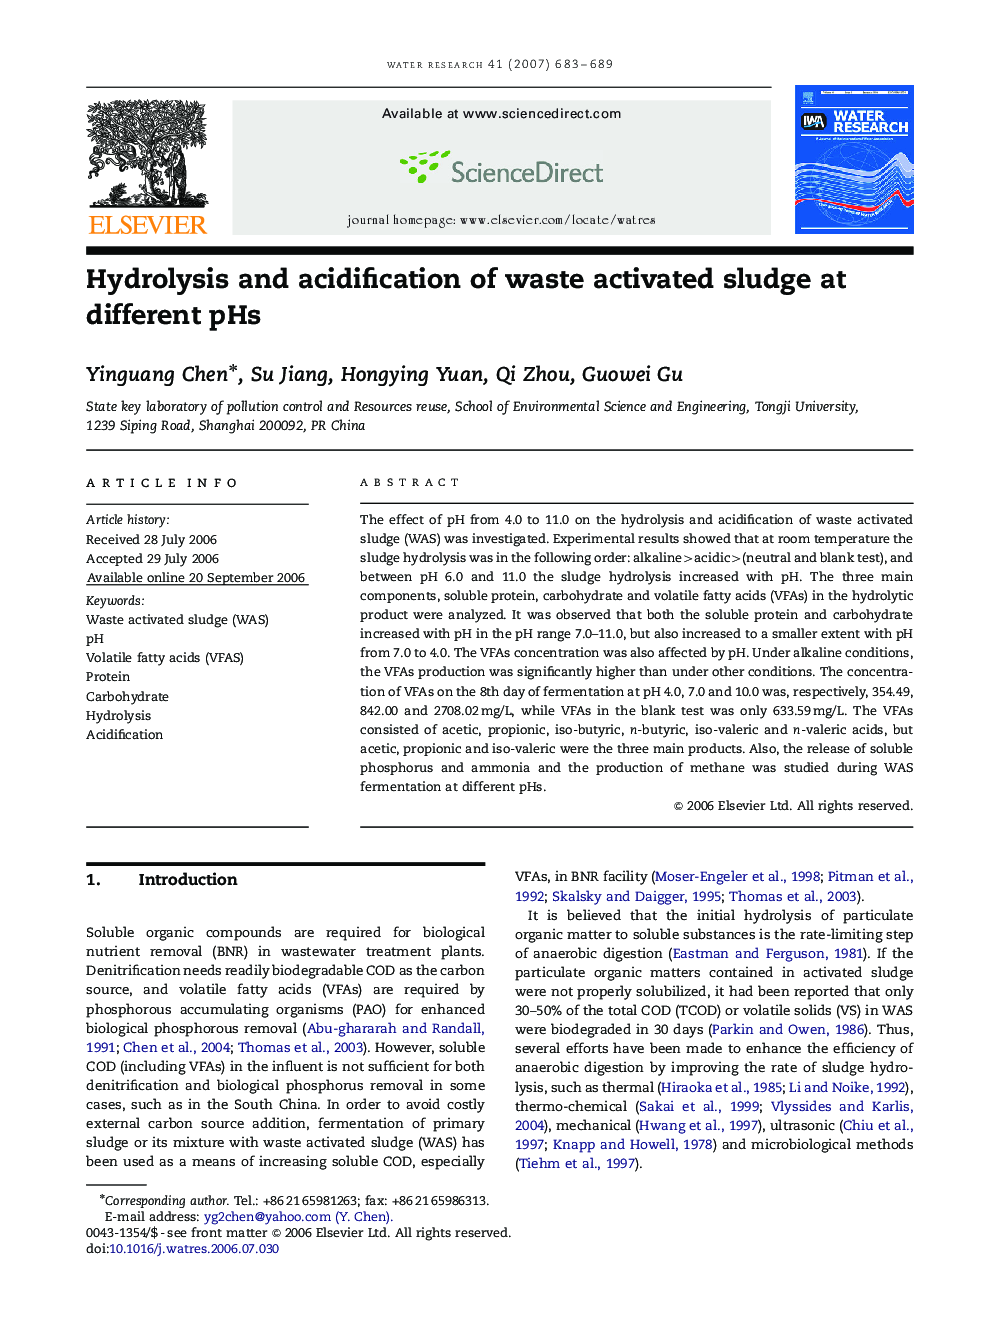 Hydrolysis and acidification of waste activated sludge at different pHs